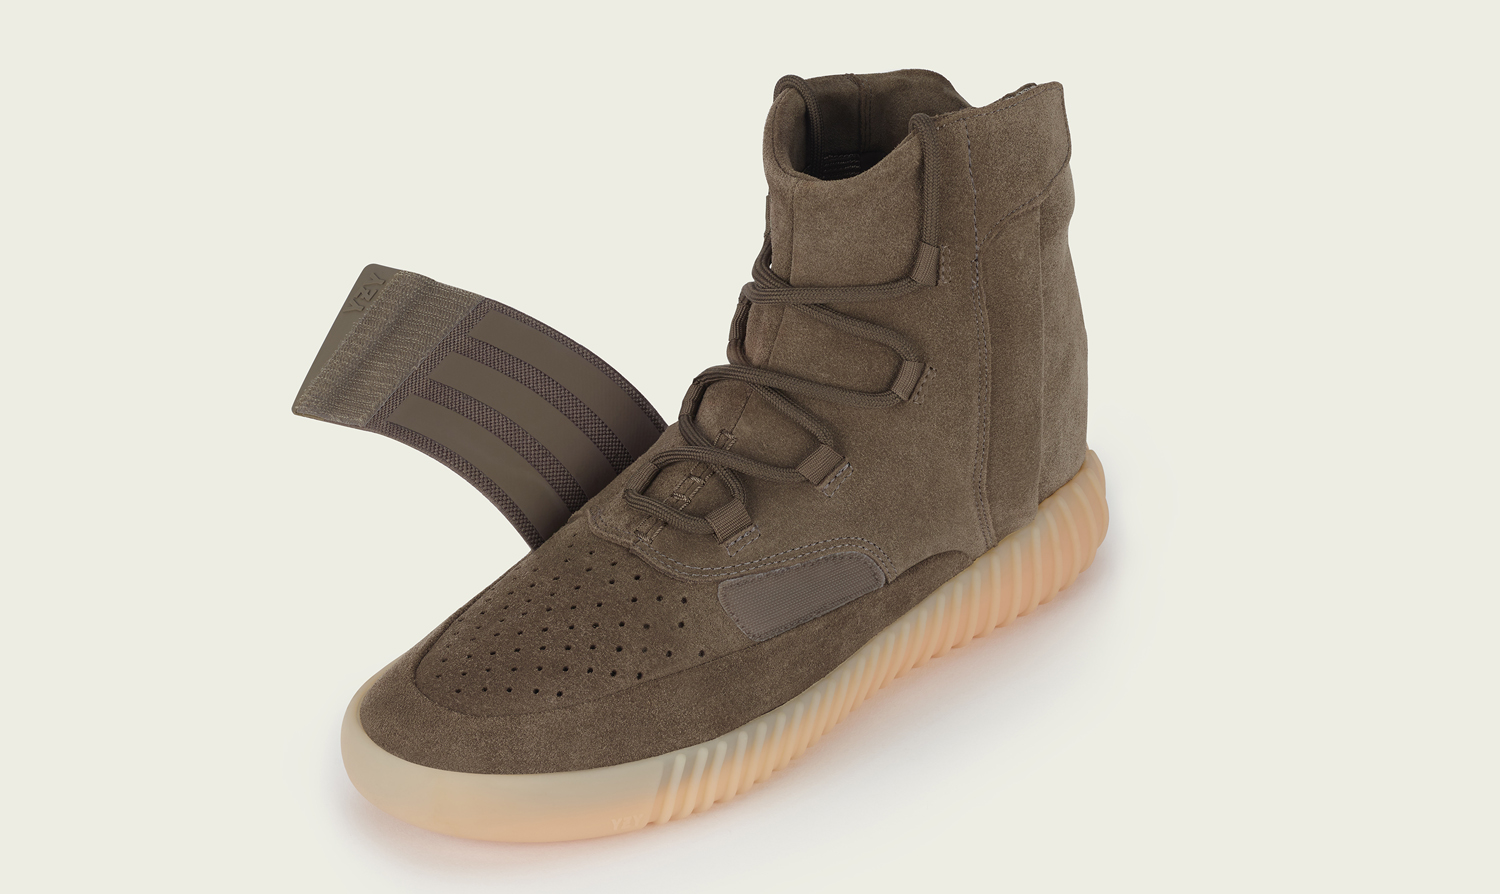 Chocolate Yeezy 750 Unstrapped